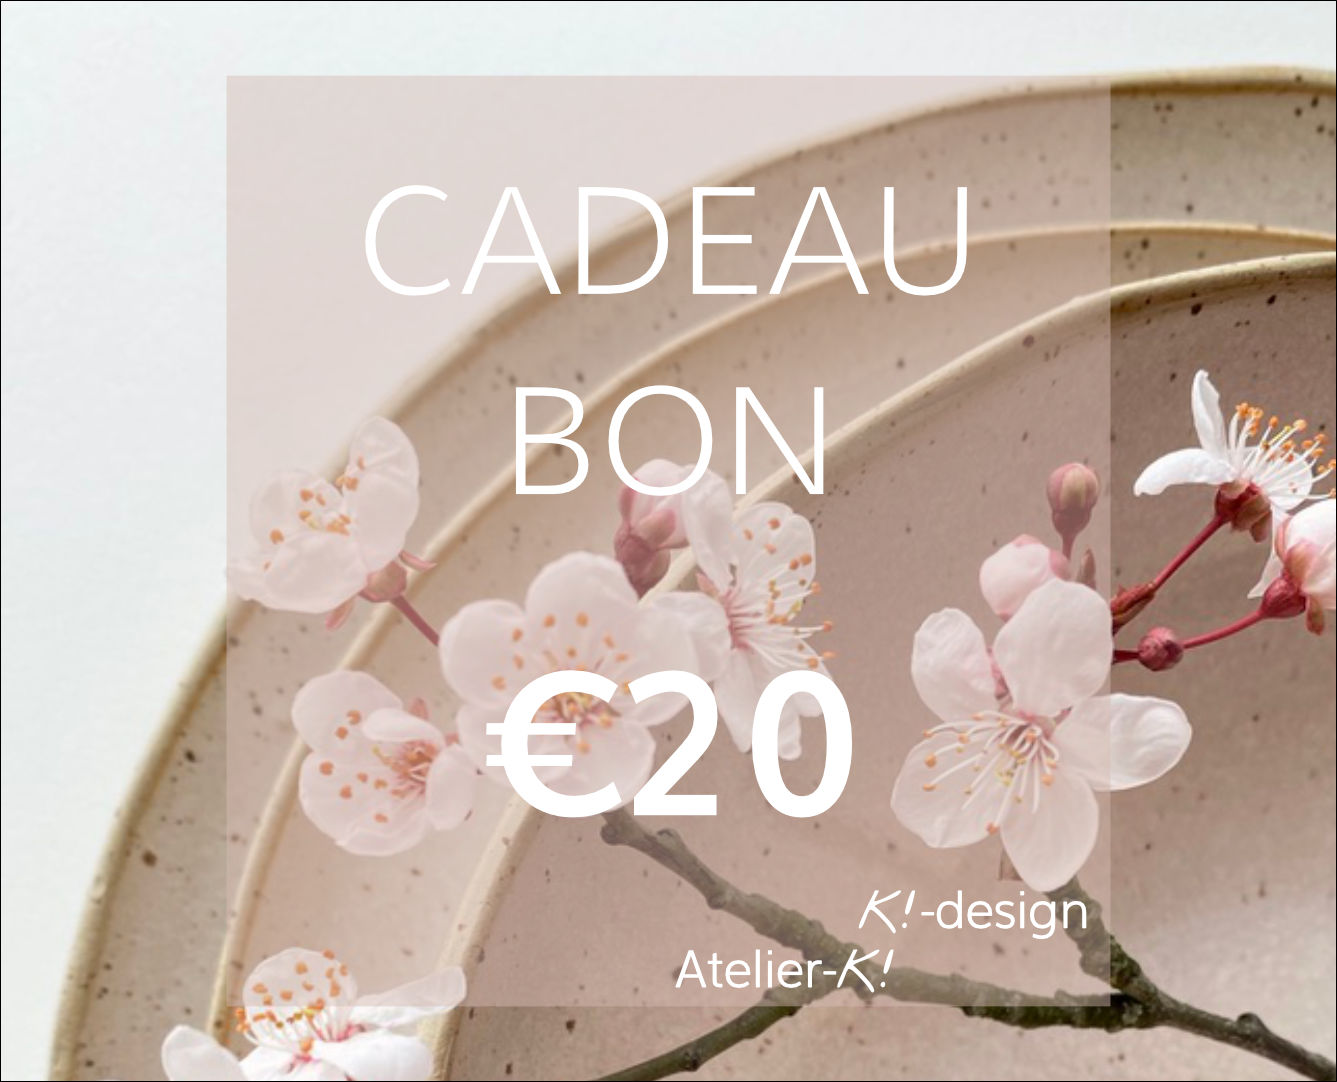 Image Gift card €20